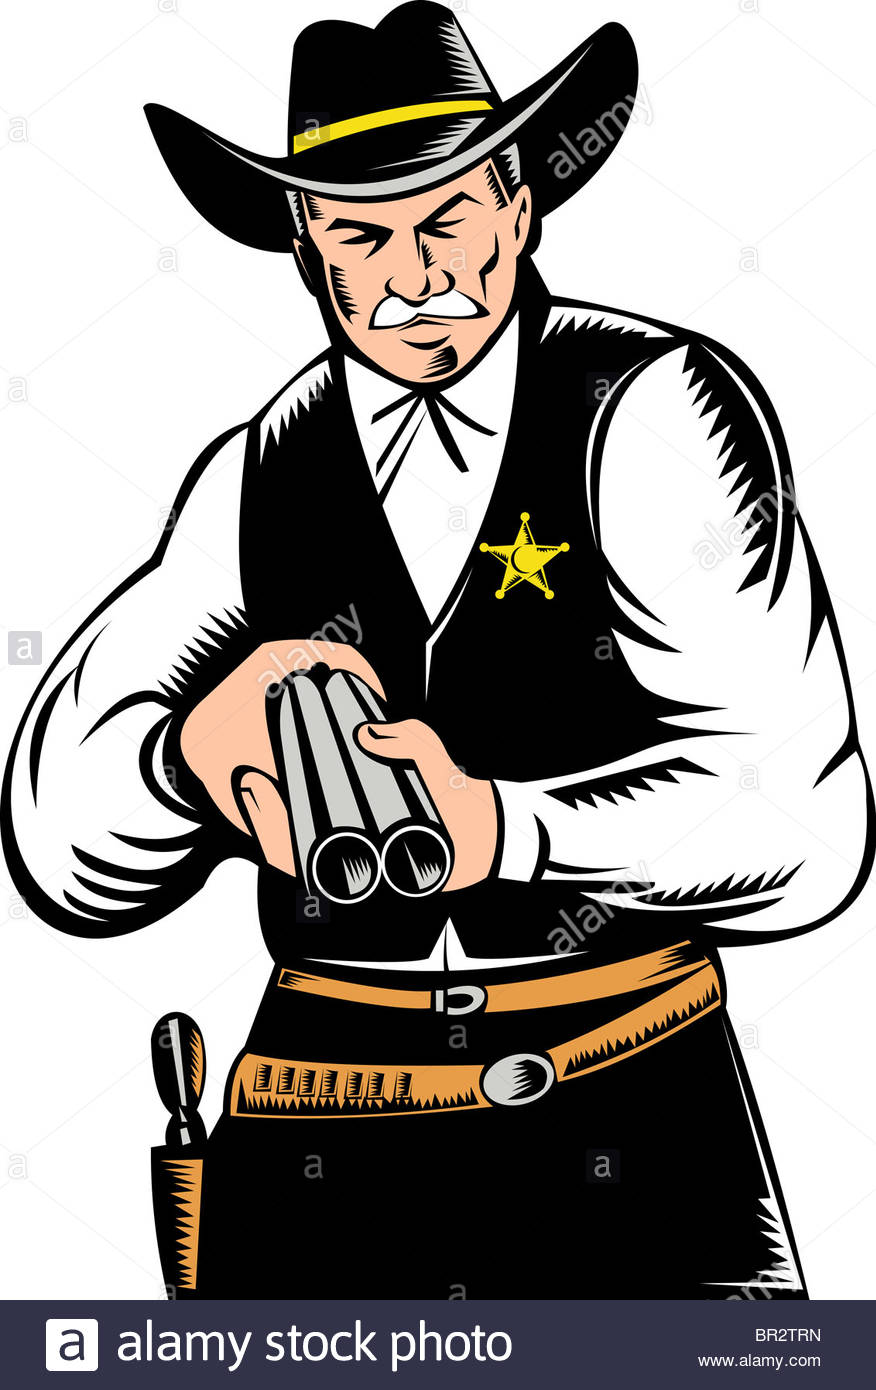 Retro Style Illustration Of A Sheriff Marshal Lawman Cowboy With.